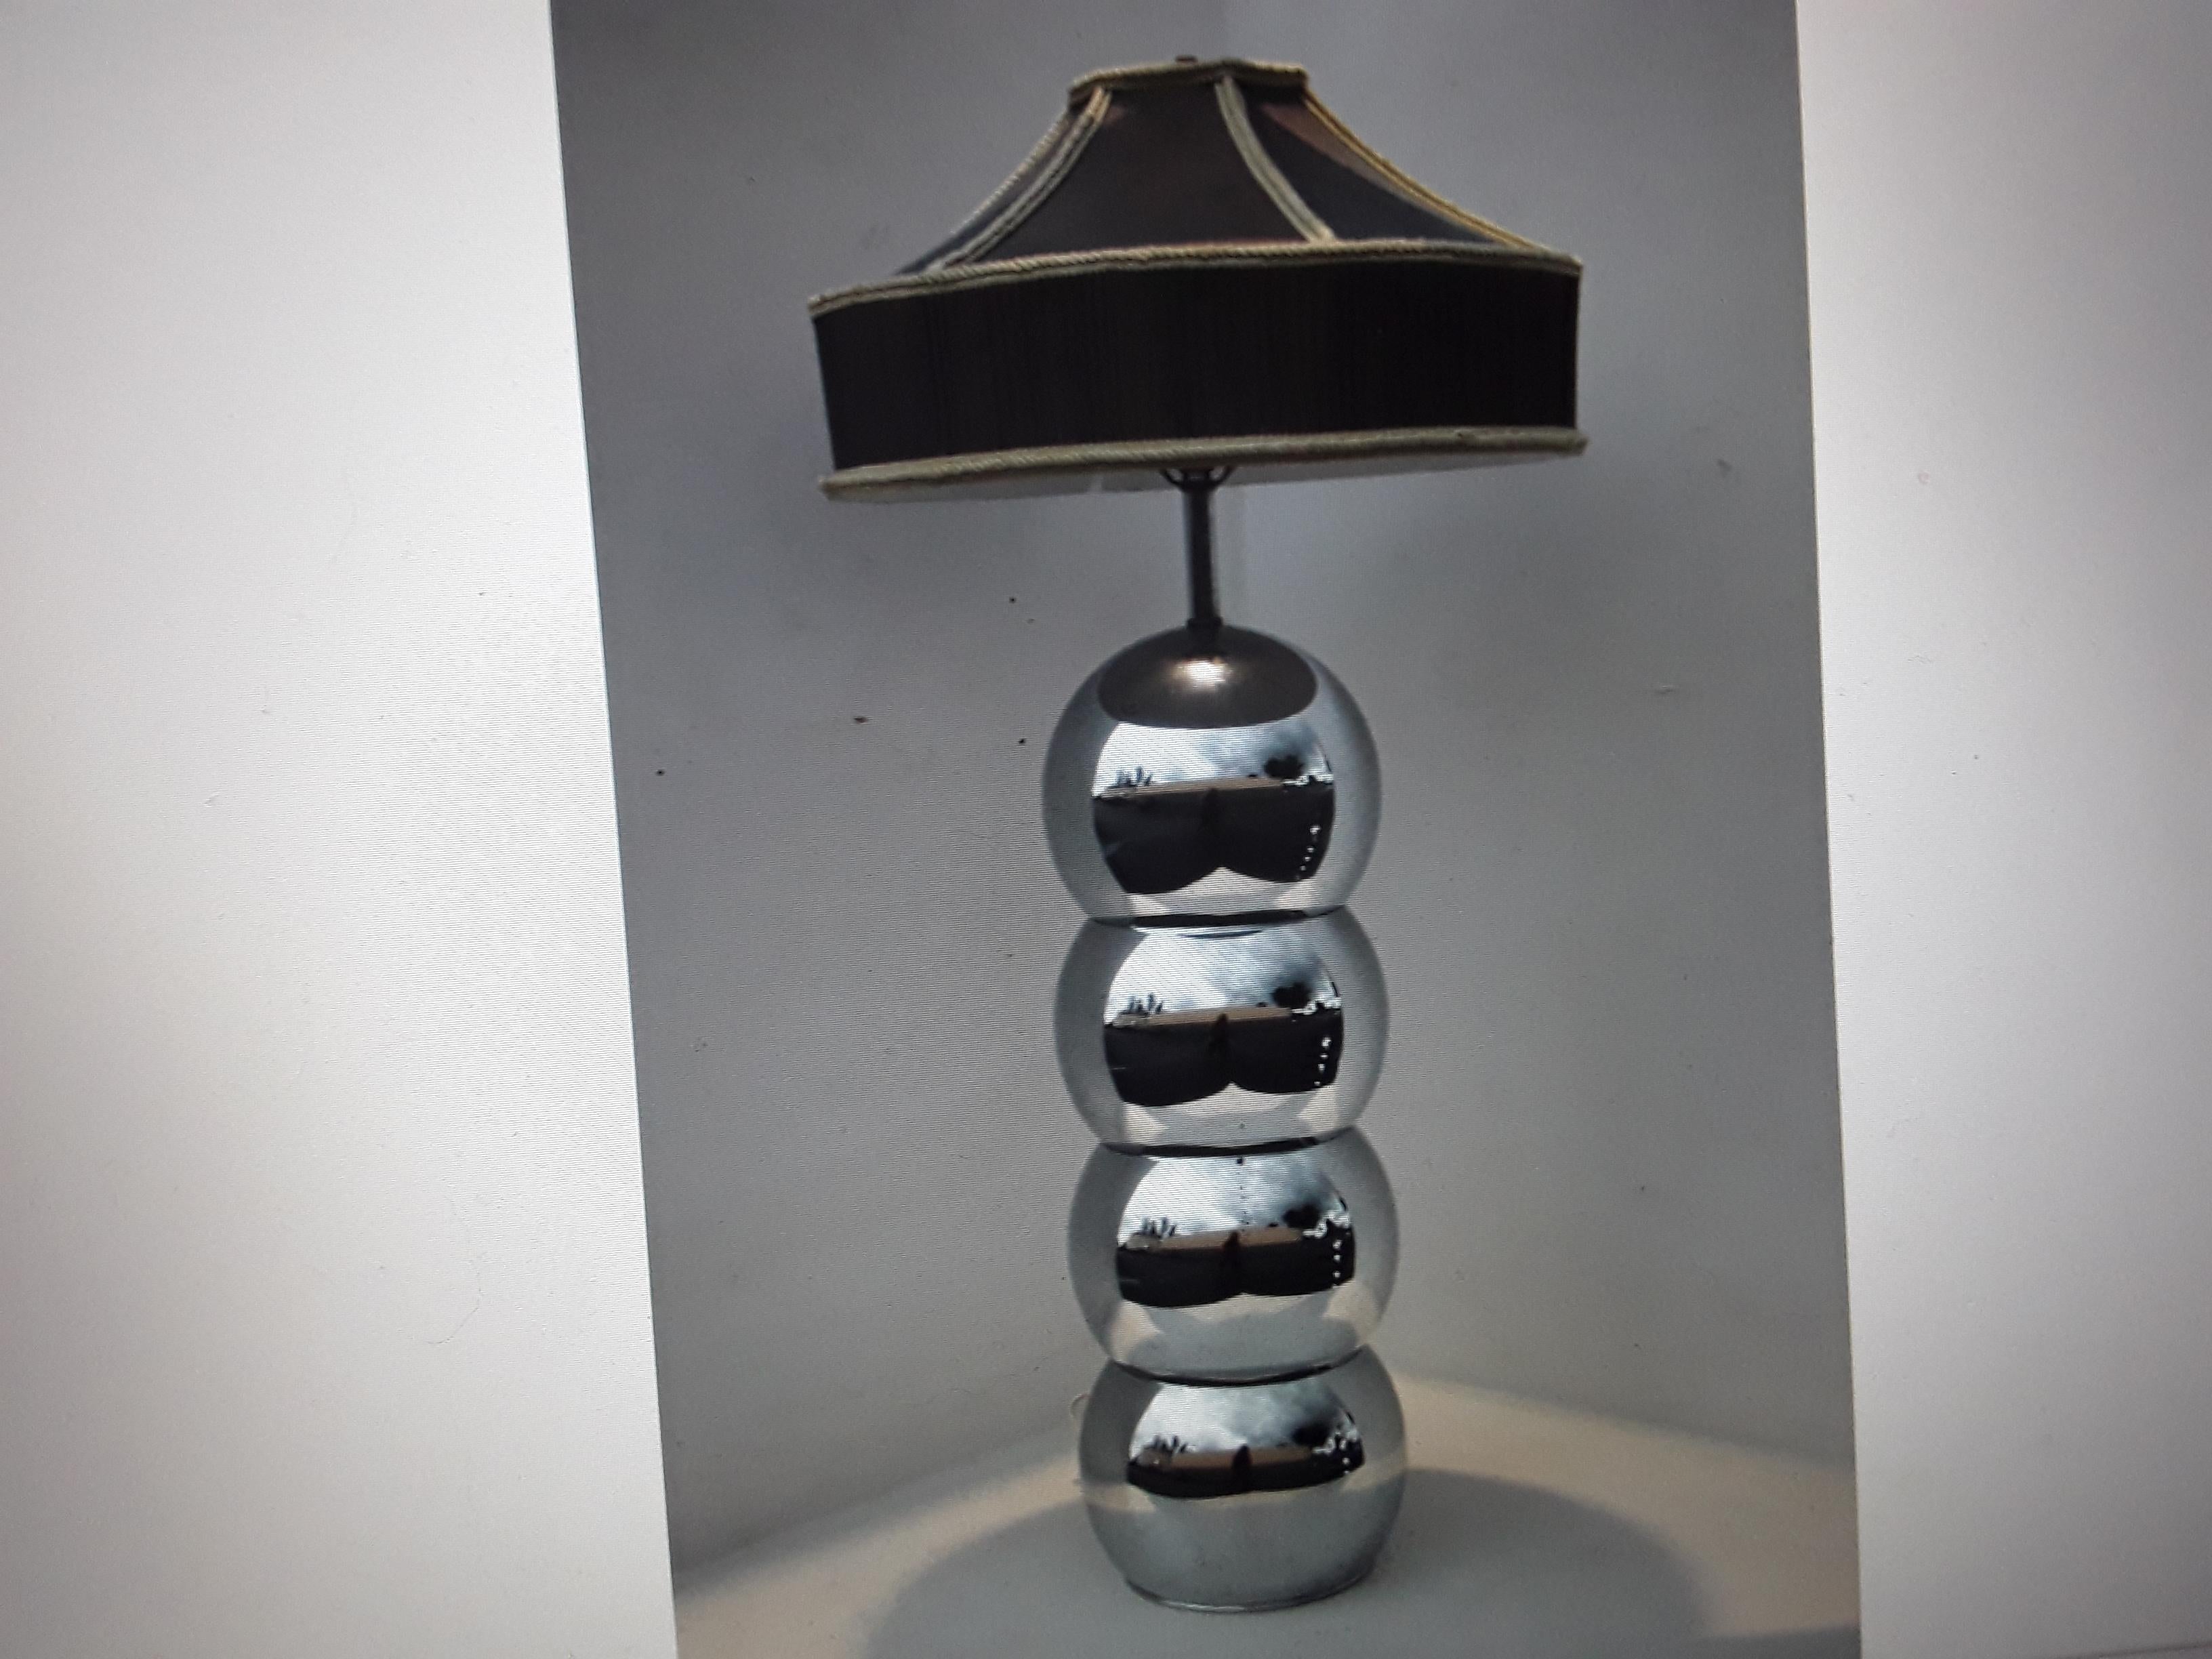 1970's Mid Century Modern Chrome Table Lamp. Lamp shade included. Beautiful modern lamp.